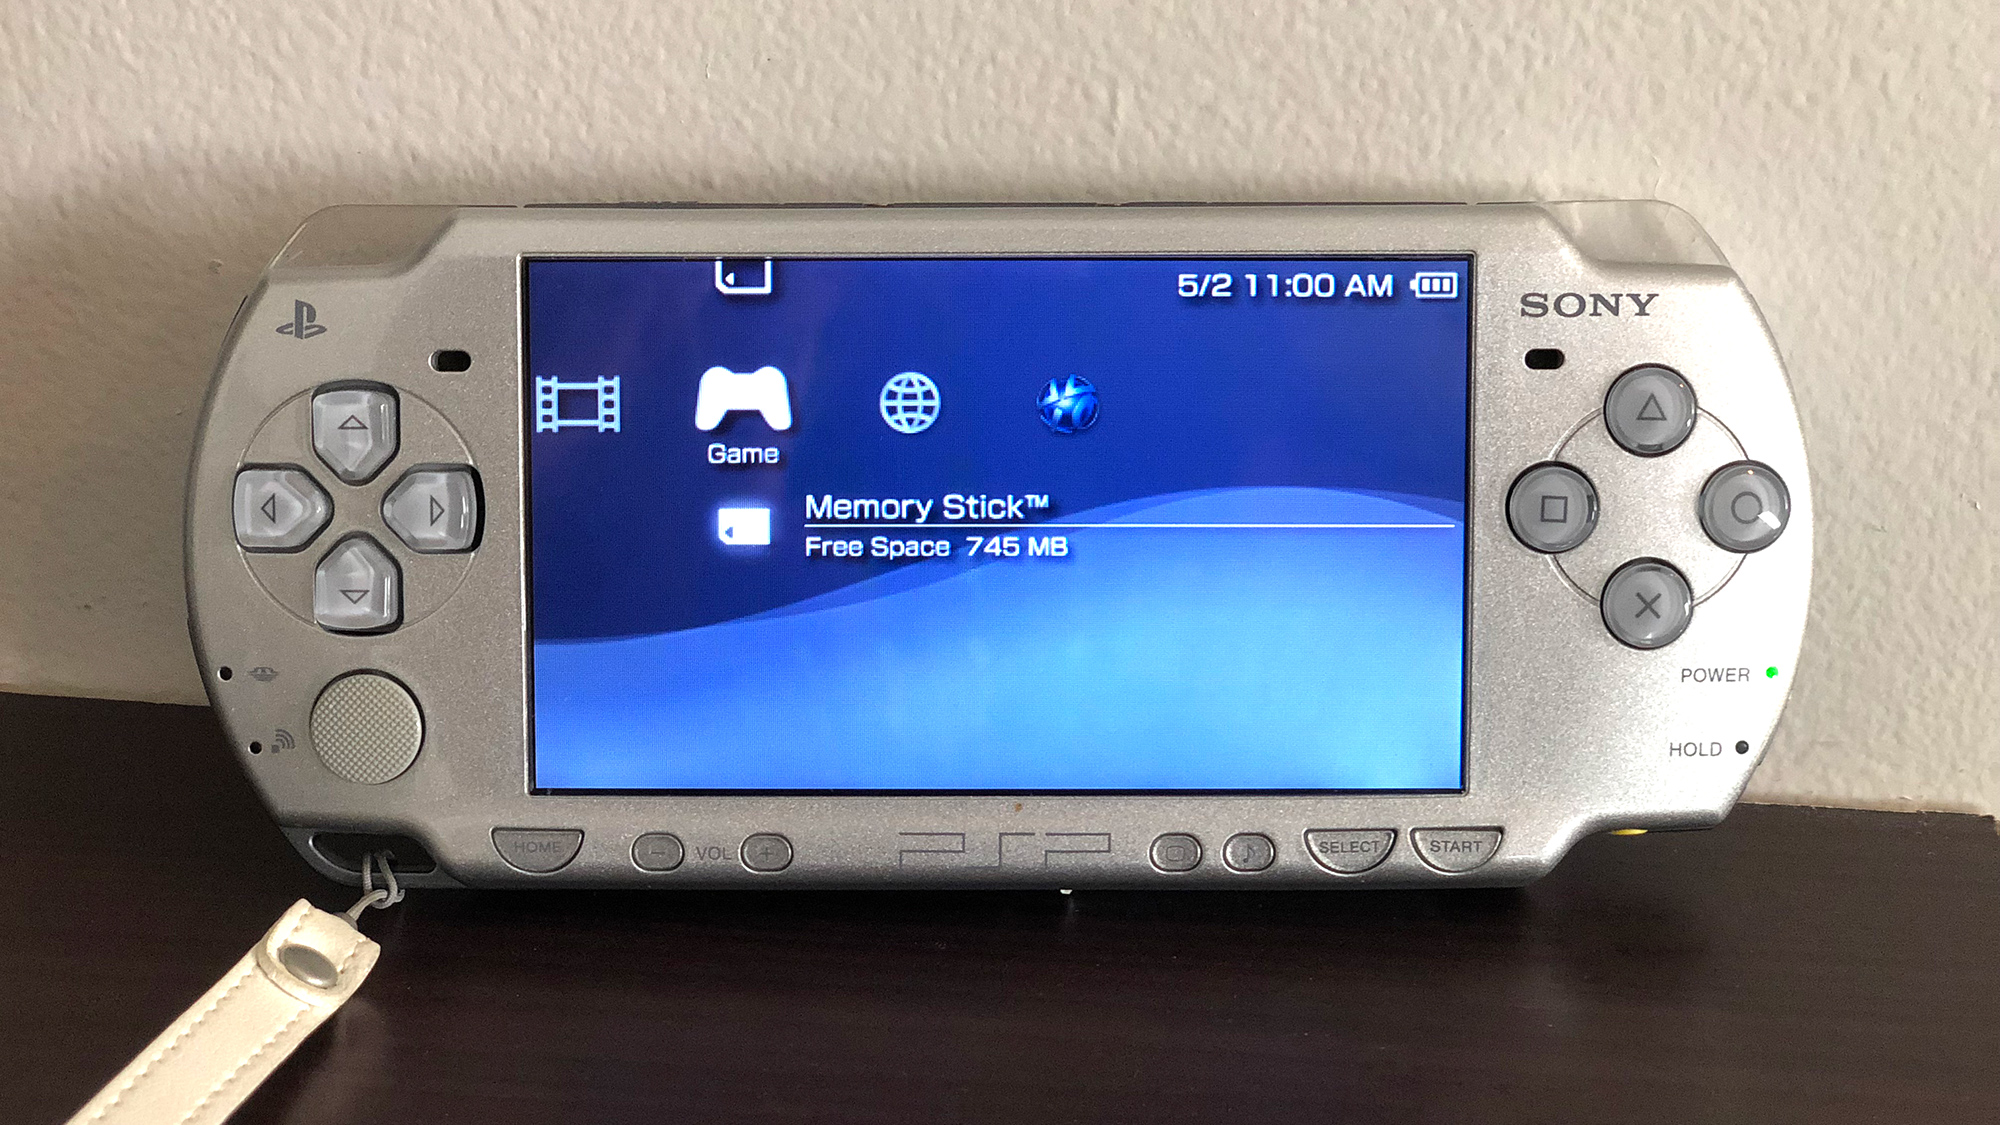 PSP Game Transfer and Error Message Woes